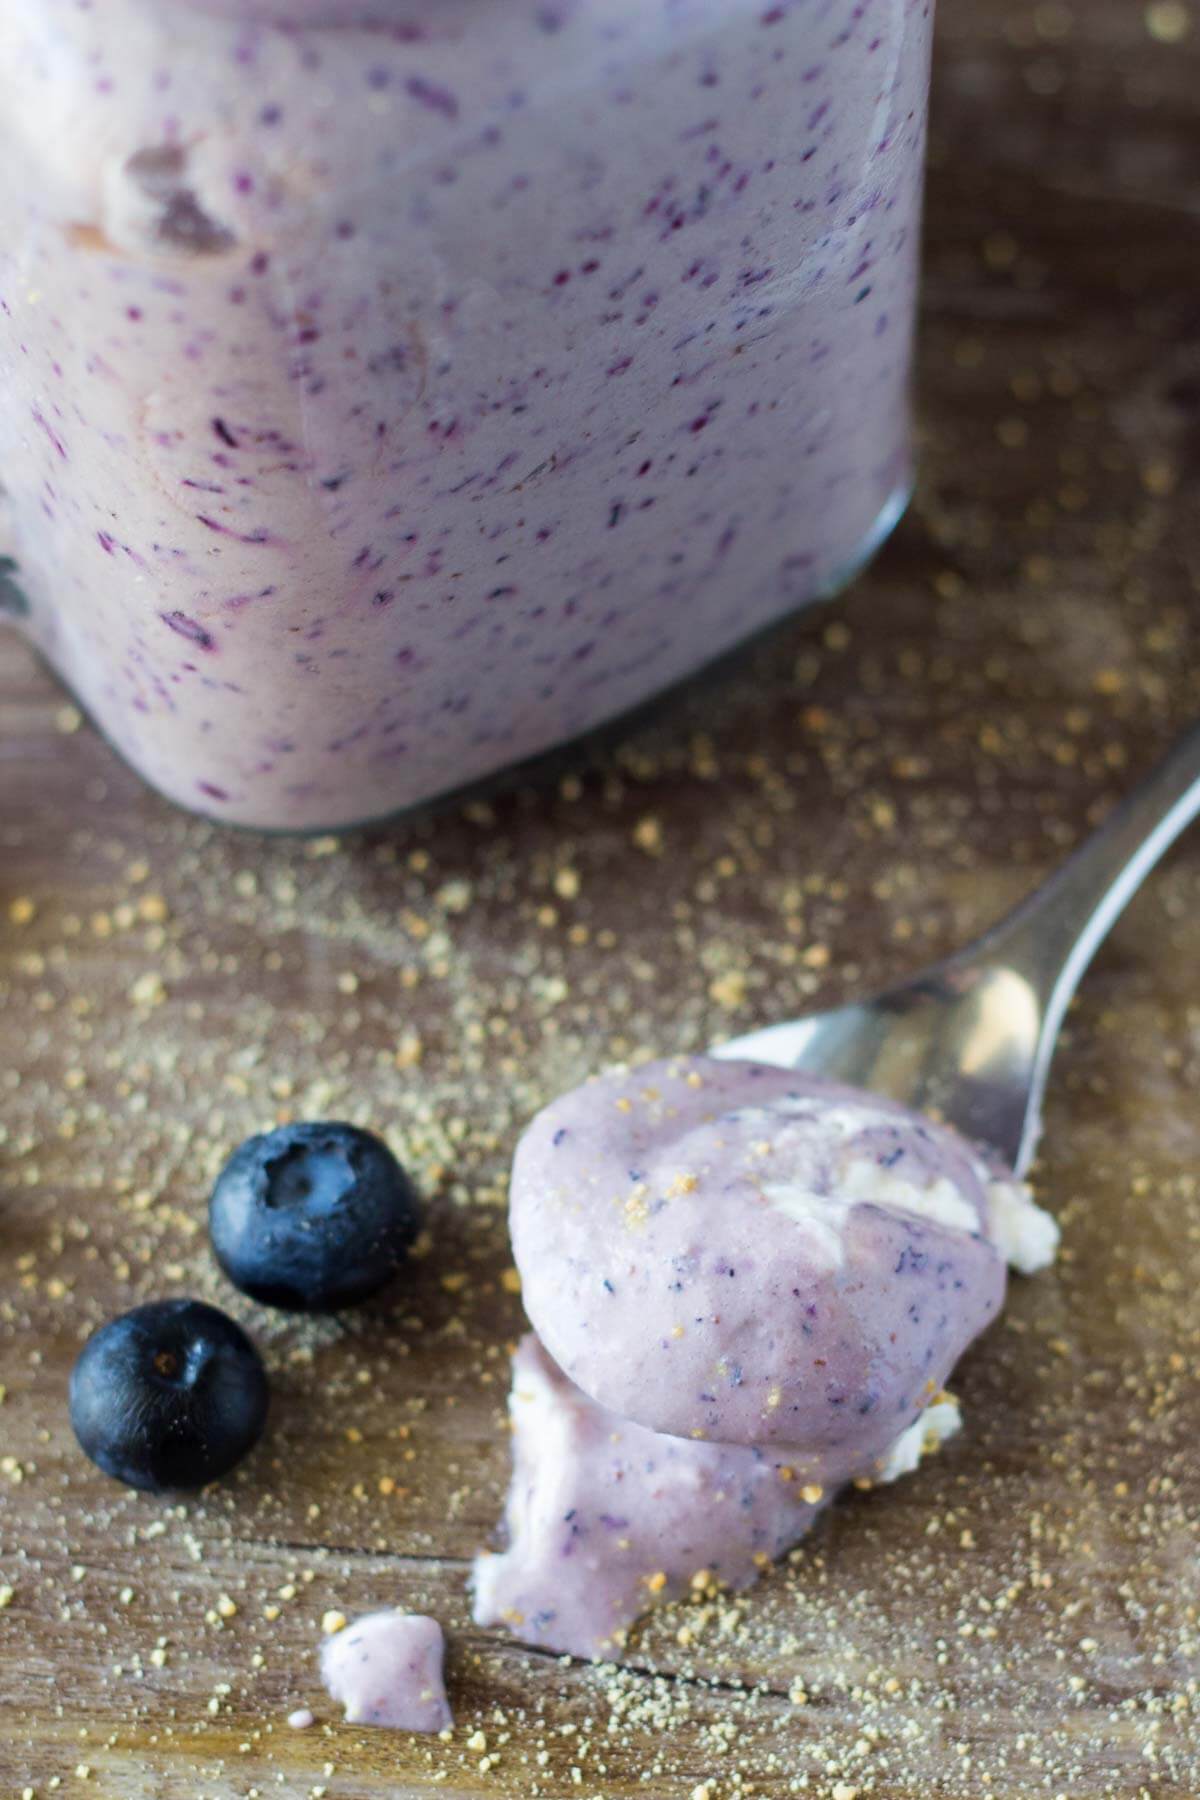 This Blueberry Cheesecake Milkshake has all the flavor of a vanilla milkshake & blueberry cheesecake! Thick, creamy & so decadent! You NEED to make this!